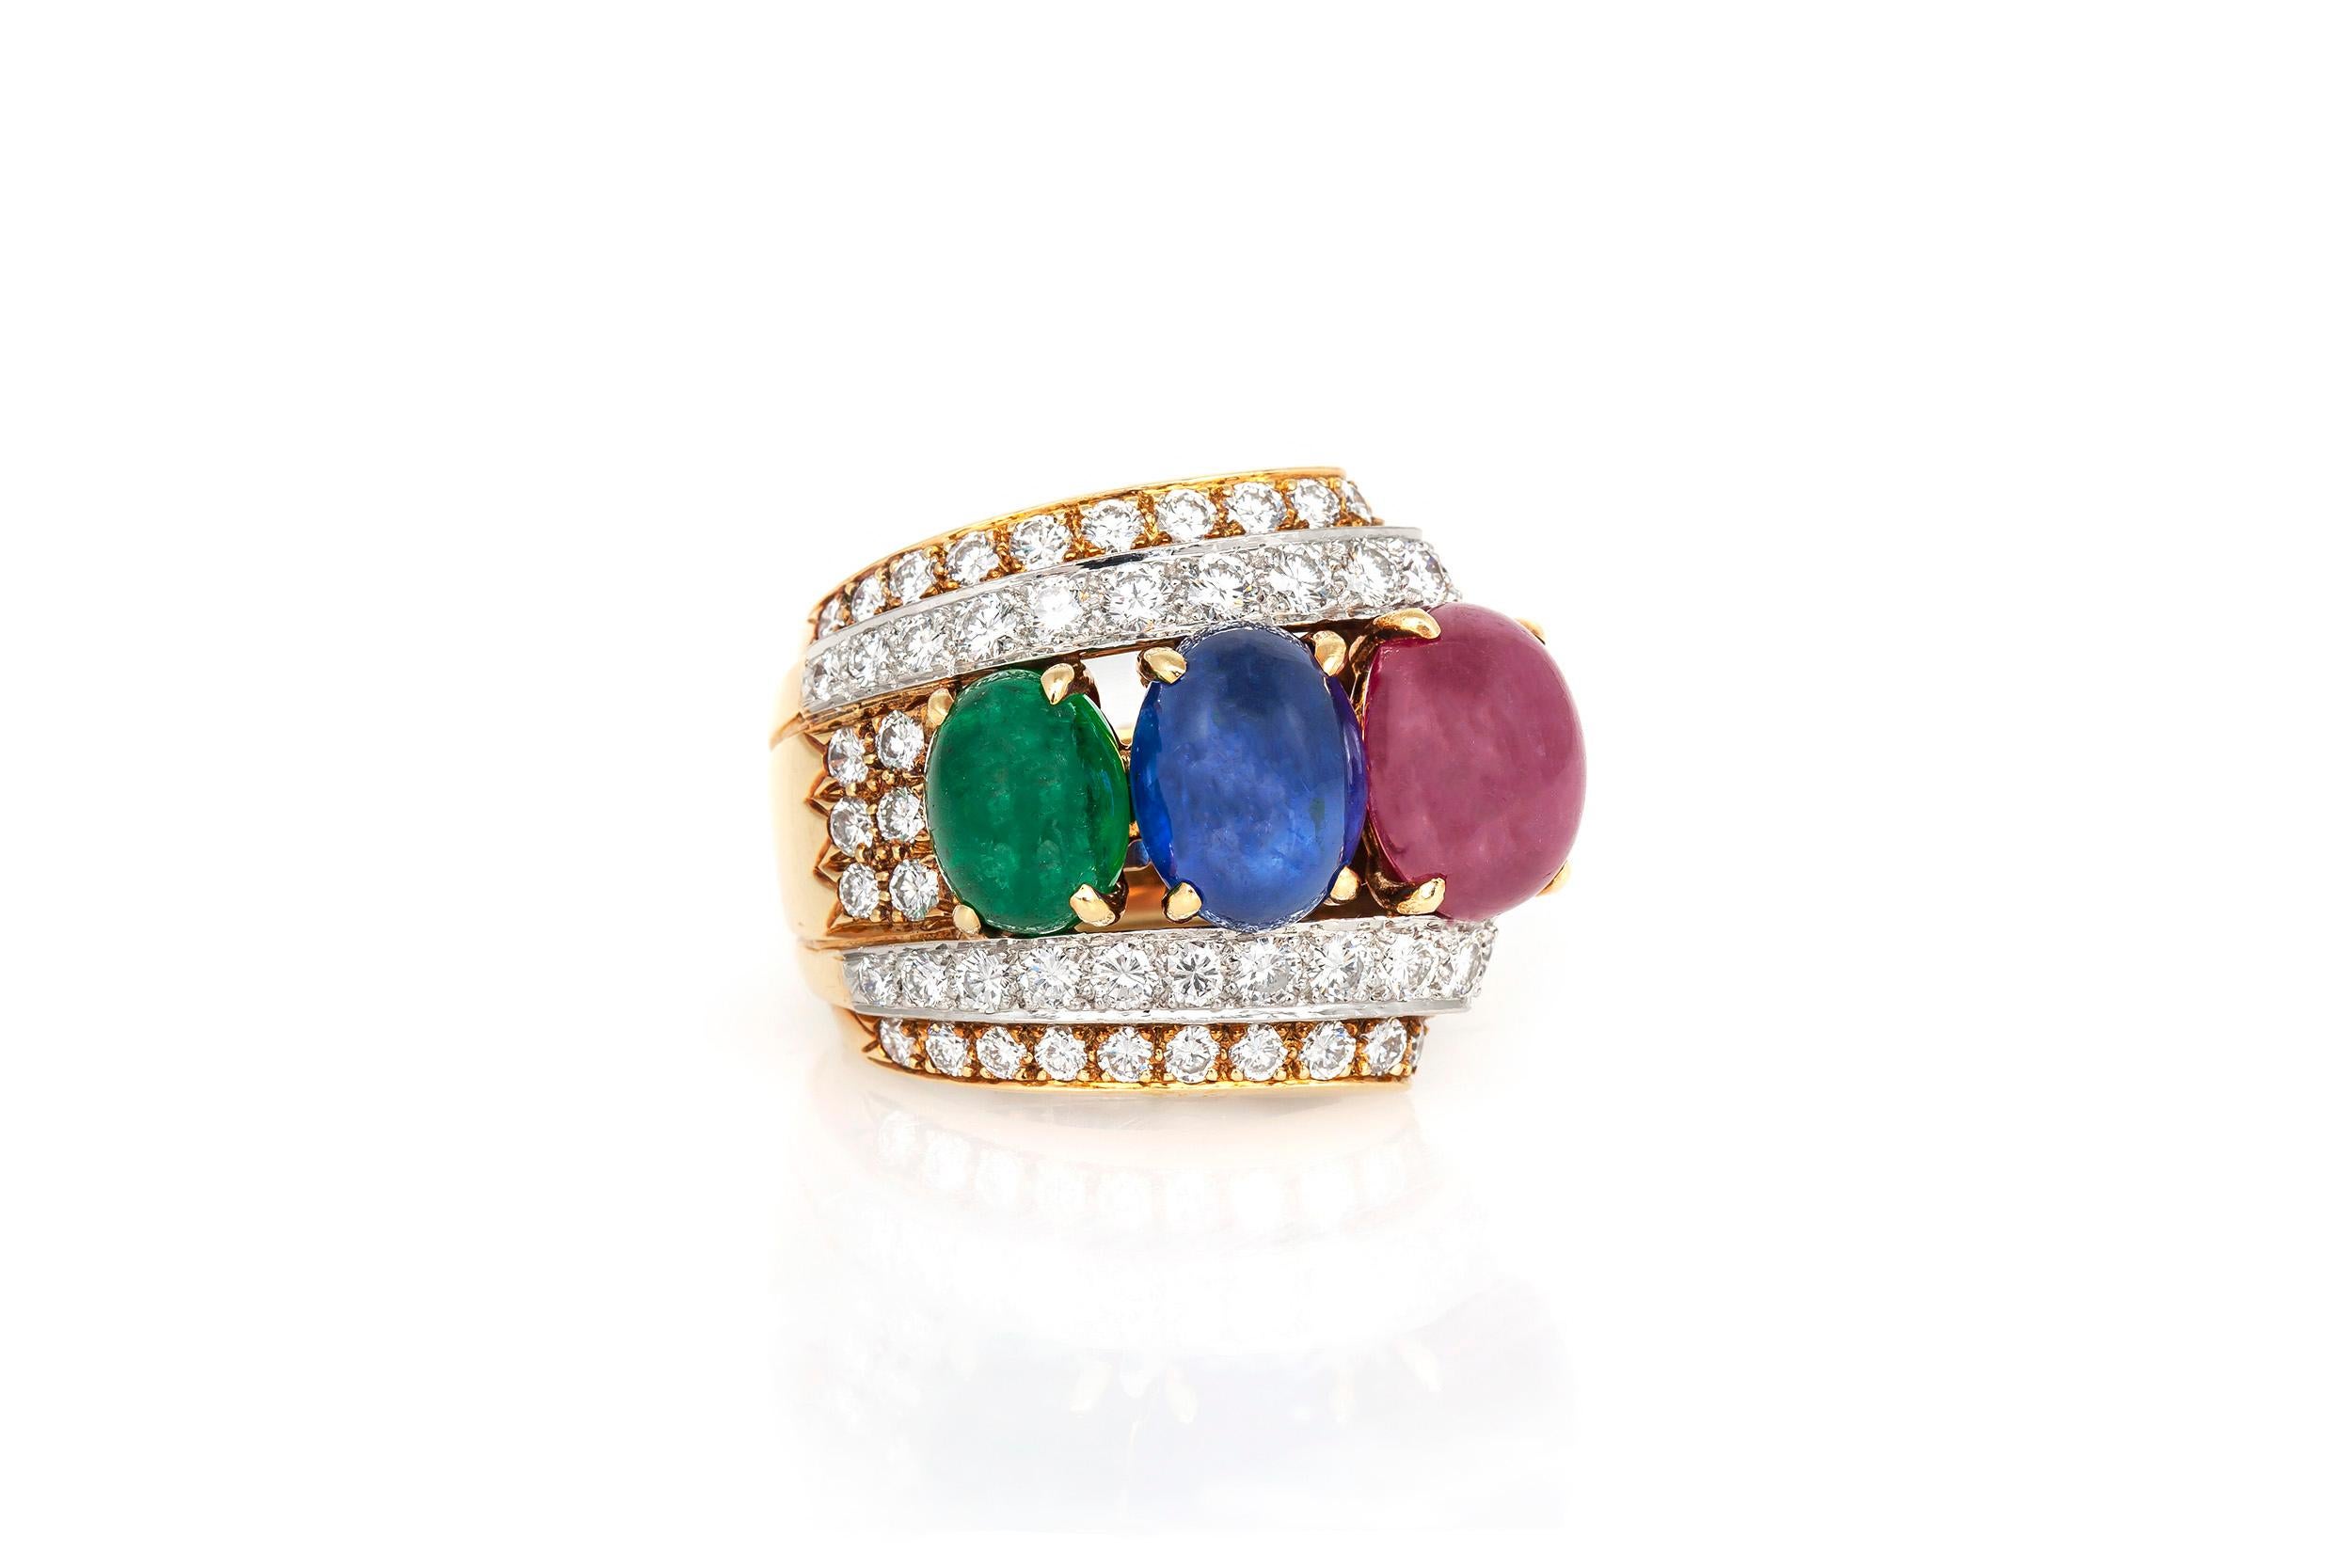 Finely crafted in 18k yellow gold and platinum with a 5.71 carat Cabochon Ruby, a 4.94 carat Cabochon Sapphire, a 2.25 carat Cabochon Emerald, and 2.03 carats of round brilliant cut Diamonds.
Signed by David Webb.
Circa 1970's.
Size 5 1/2